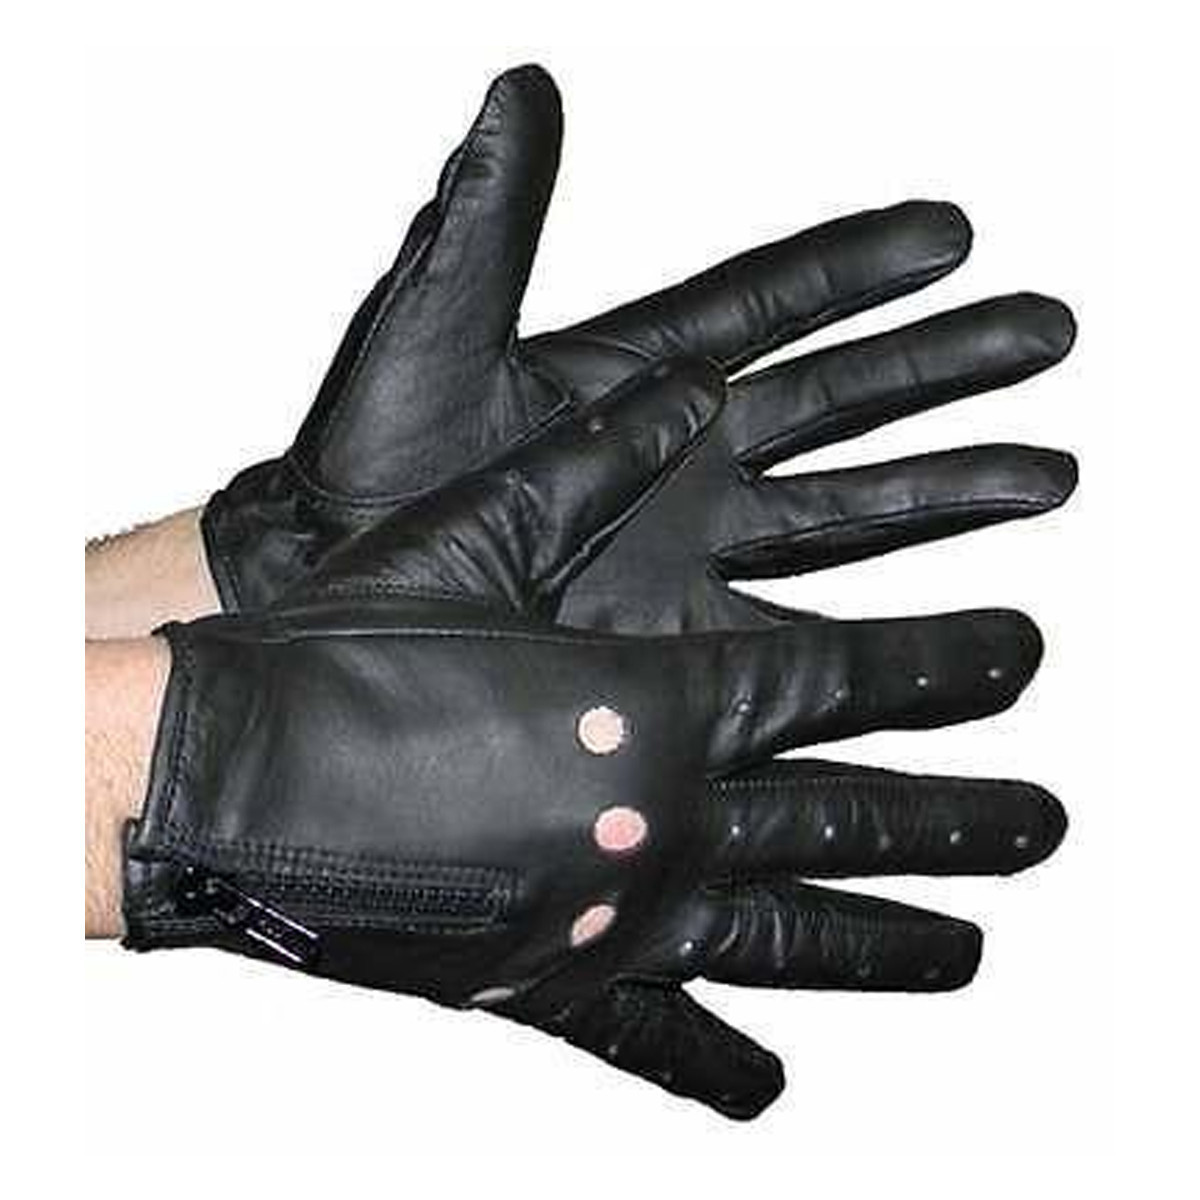 Vance VL442 Mens Black Perforated Zipper Leather Gloves - Team Motorcycle